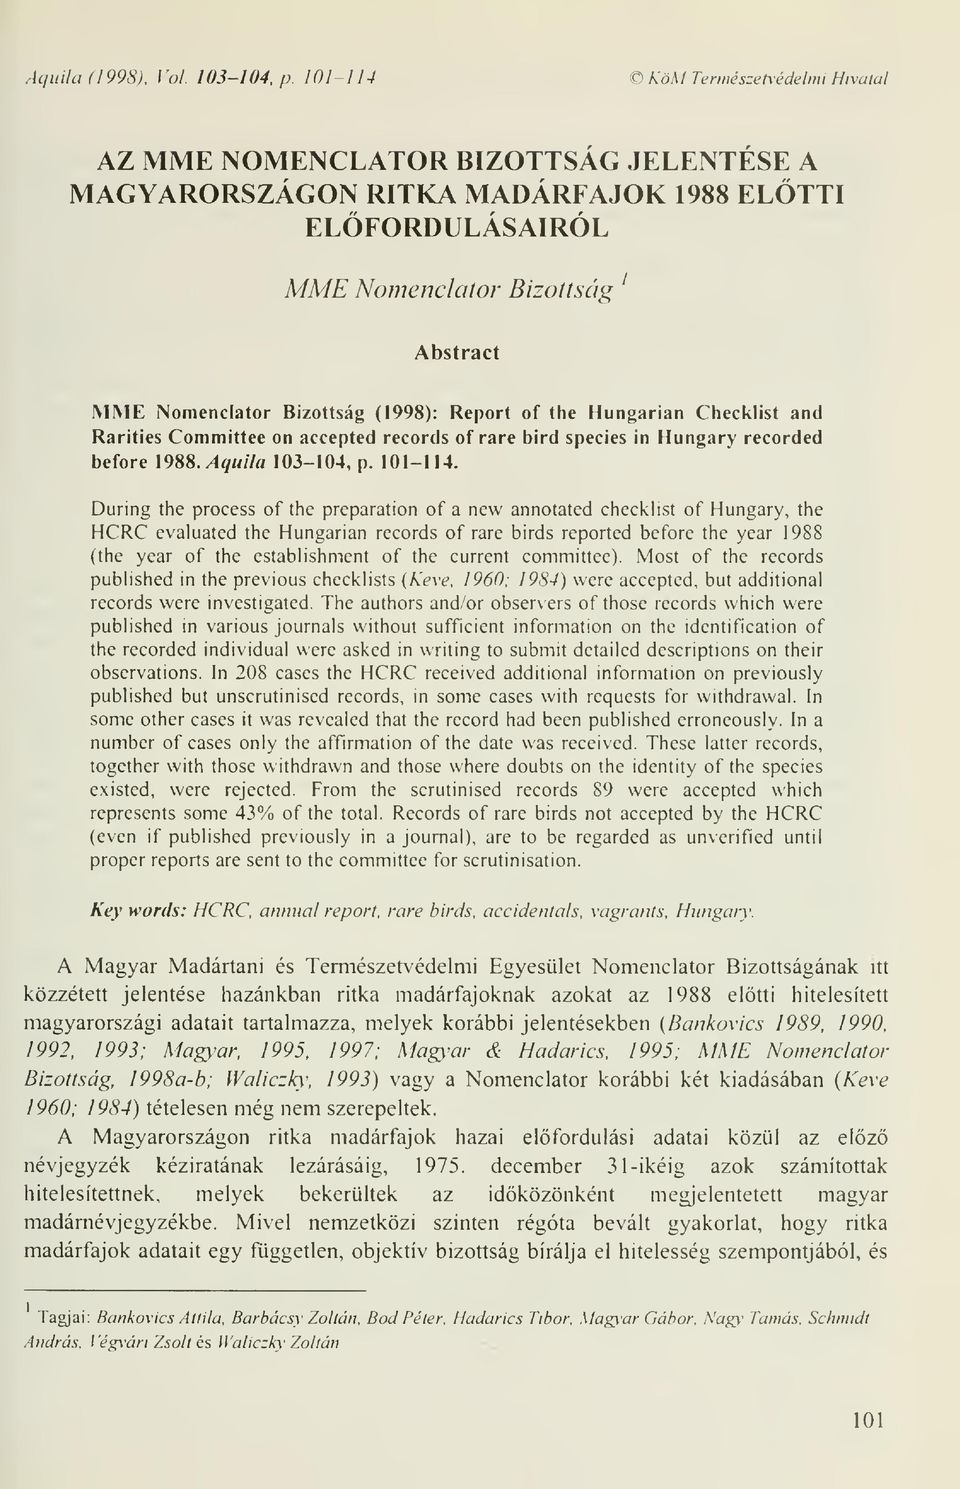 (1998): Report of the Hungarian Checklist and Rarities Committee on accepted records of rare bird species in Hungary recorded before 1988. Aquila 103-104, p. 101-114.